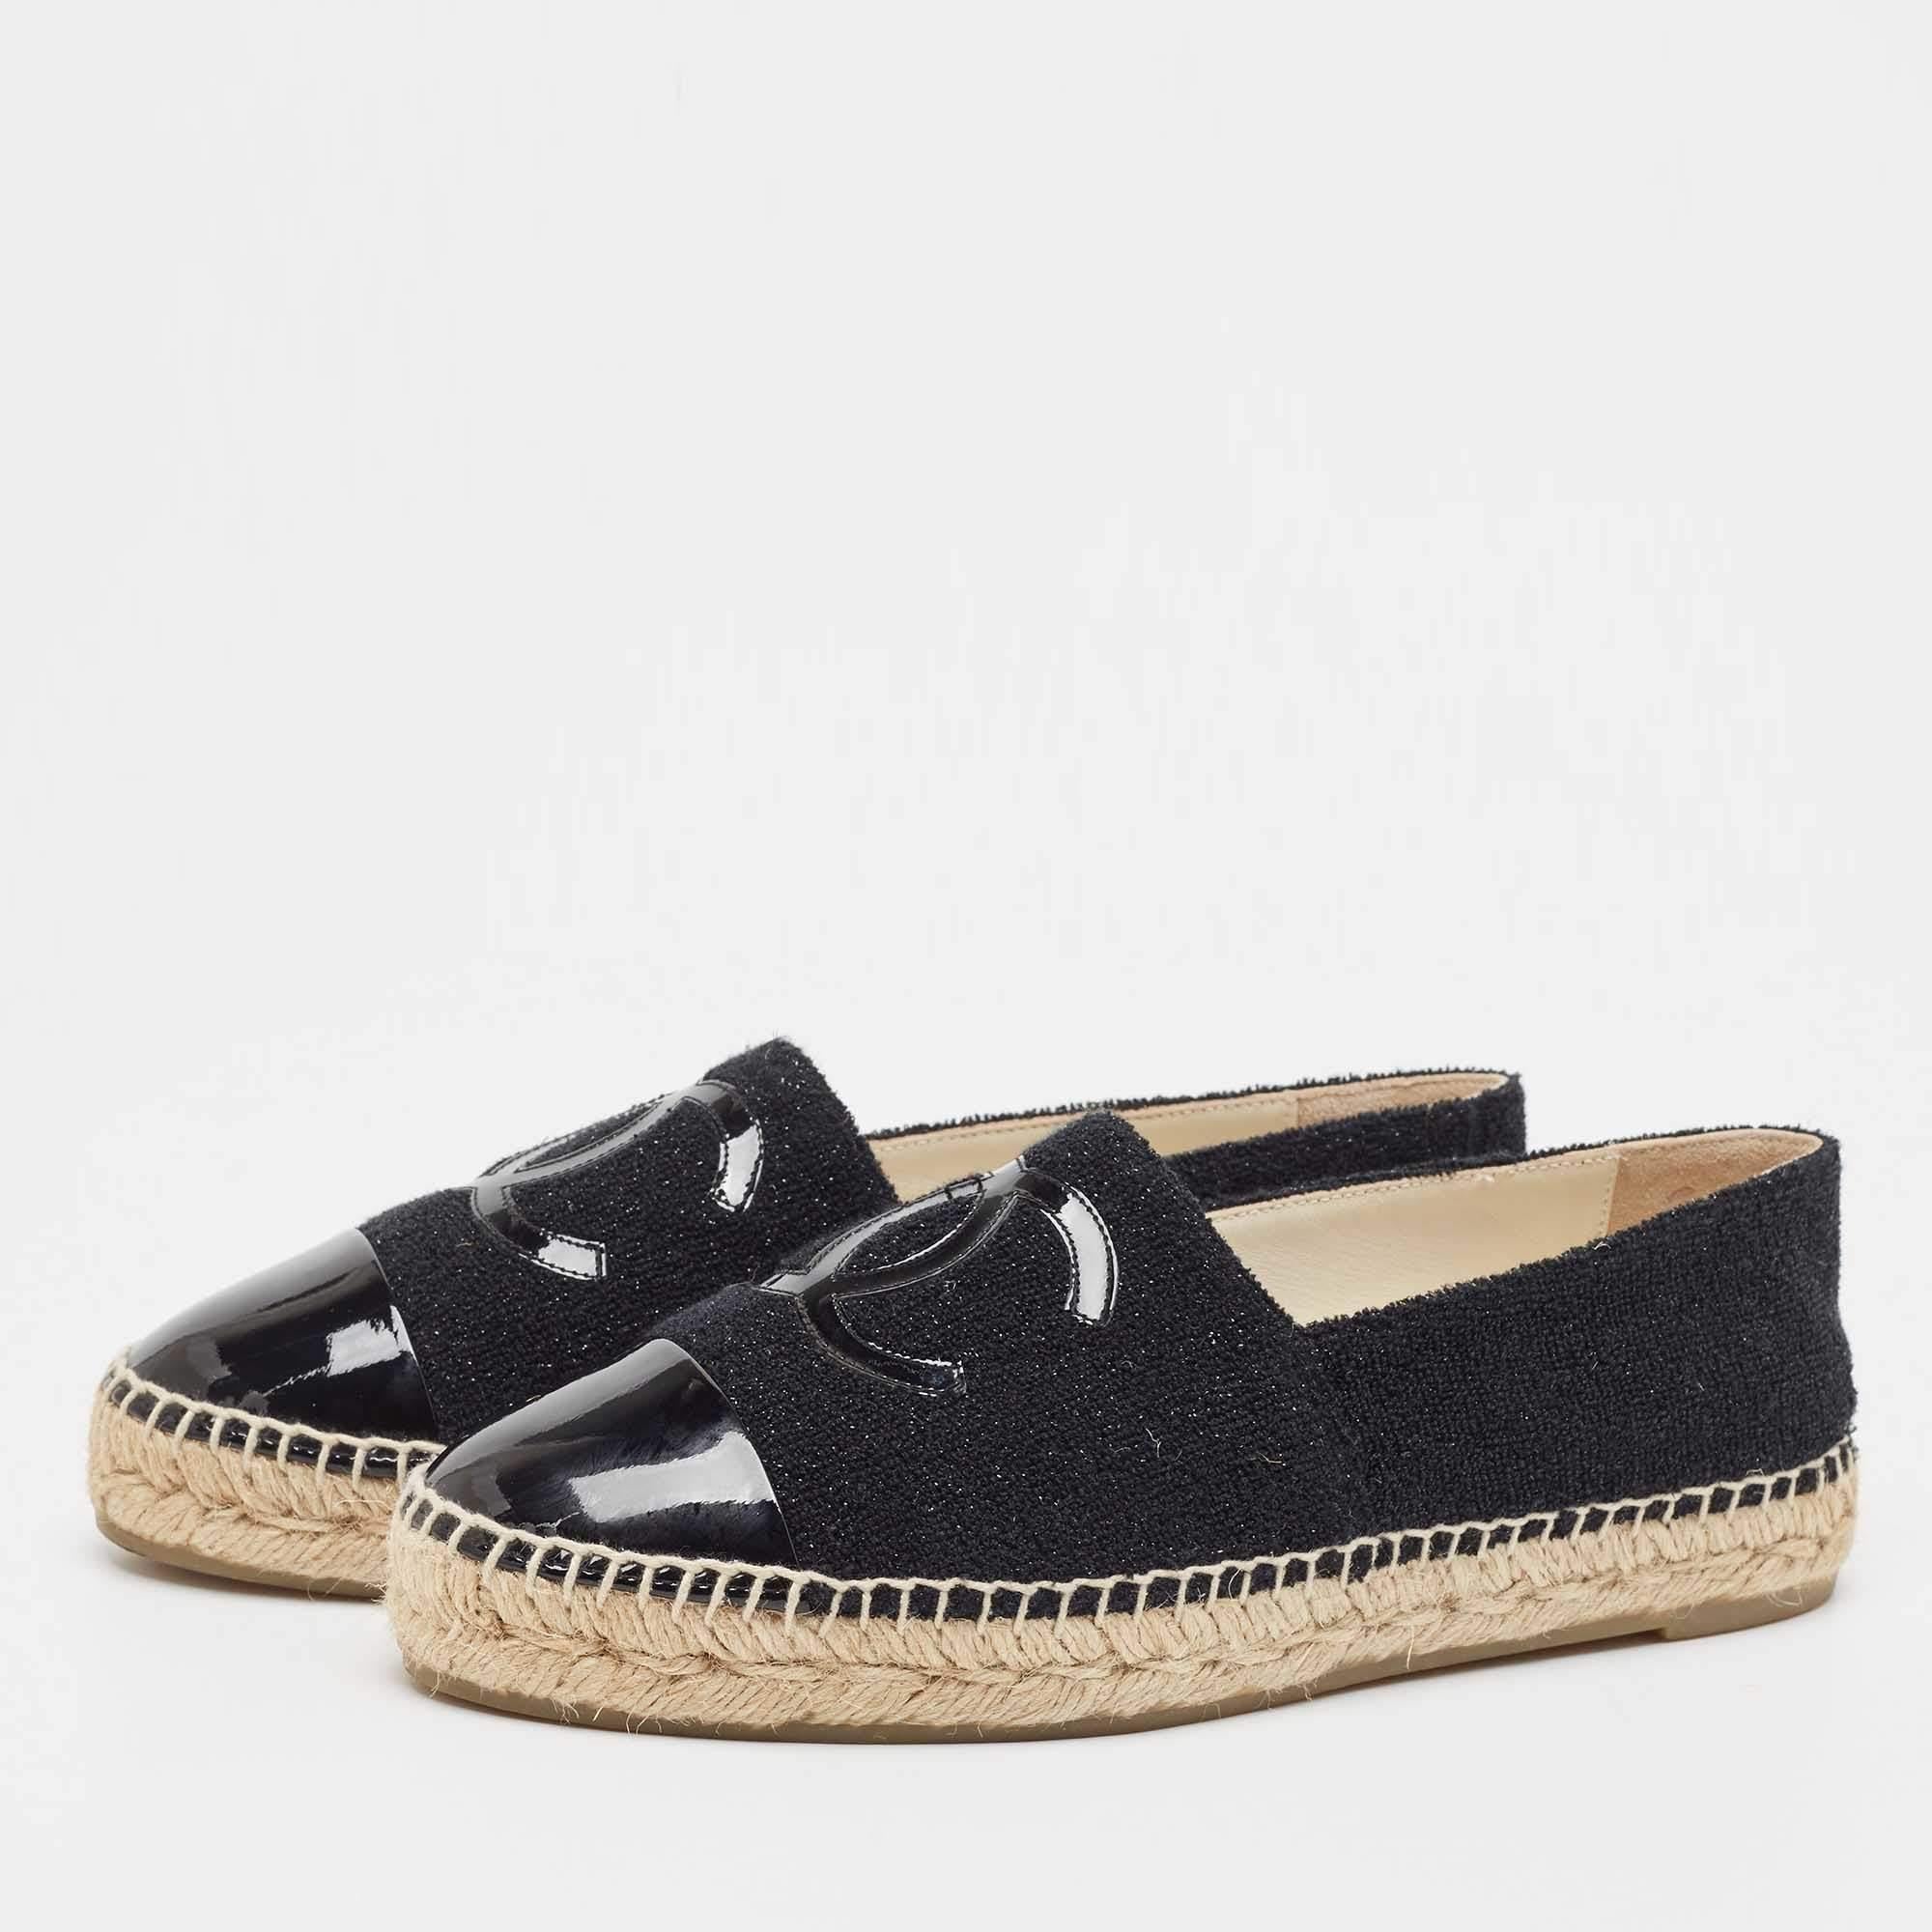 These designer loafers by Saint Laurent will be your favorite go-to pair for off-duty looks. Crafted using leather, the flats have round toes and durable soles.

